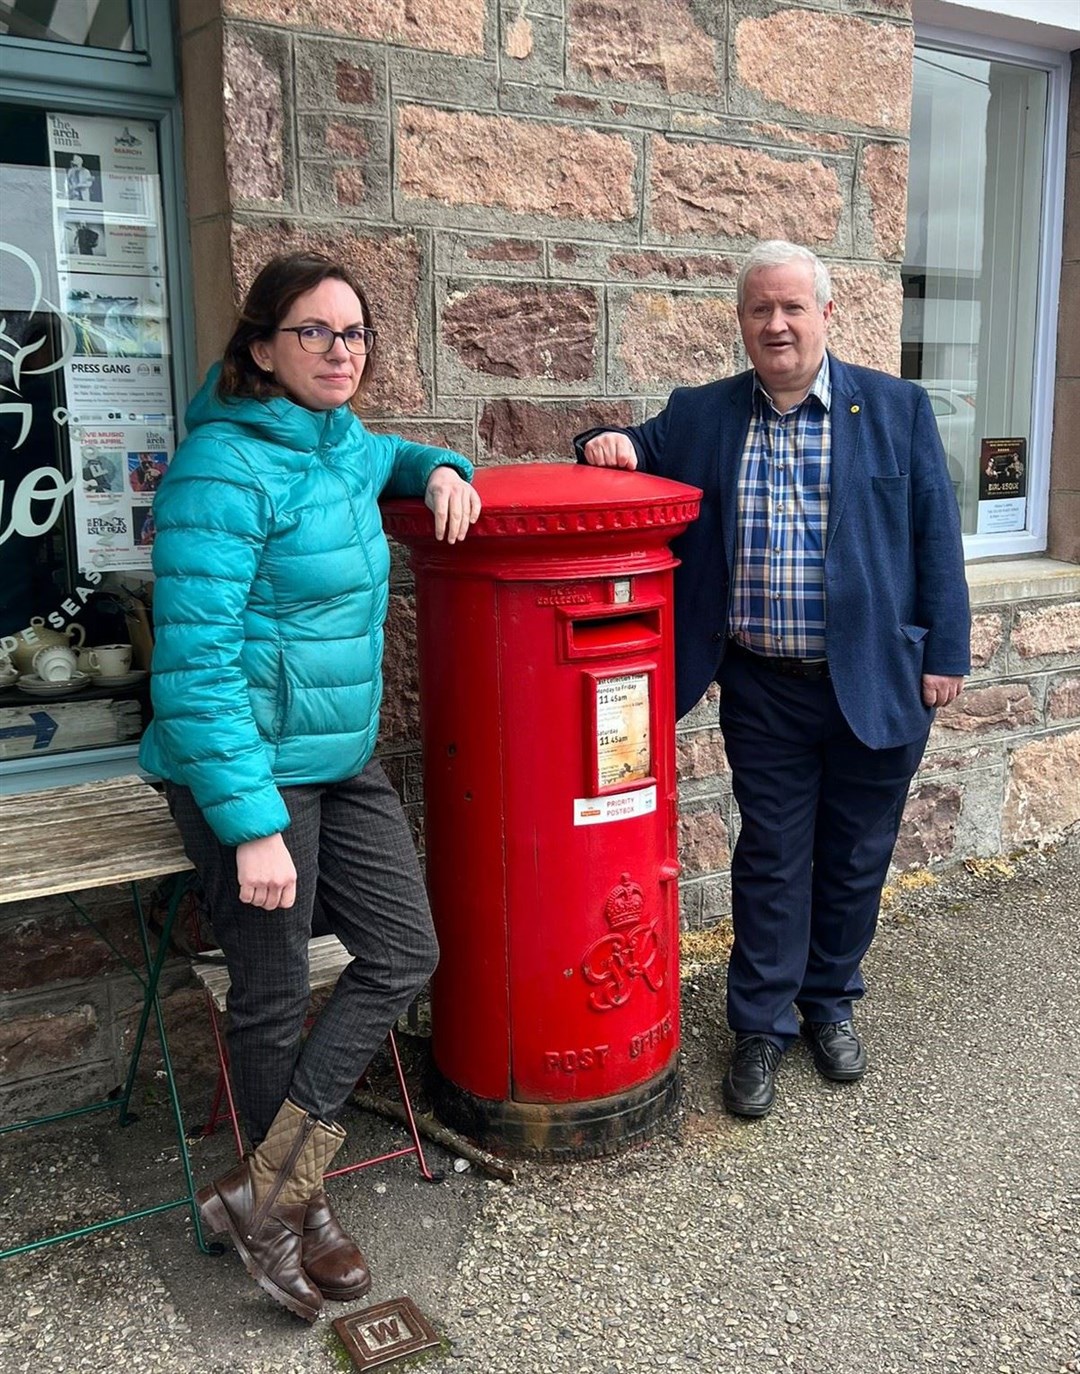 Parliamentary candidate Lucy Beattie and MP Ian Blackford, beside a post box in Ullapool.